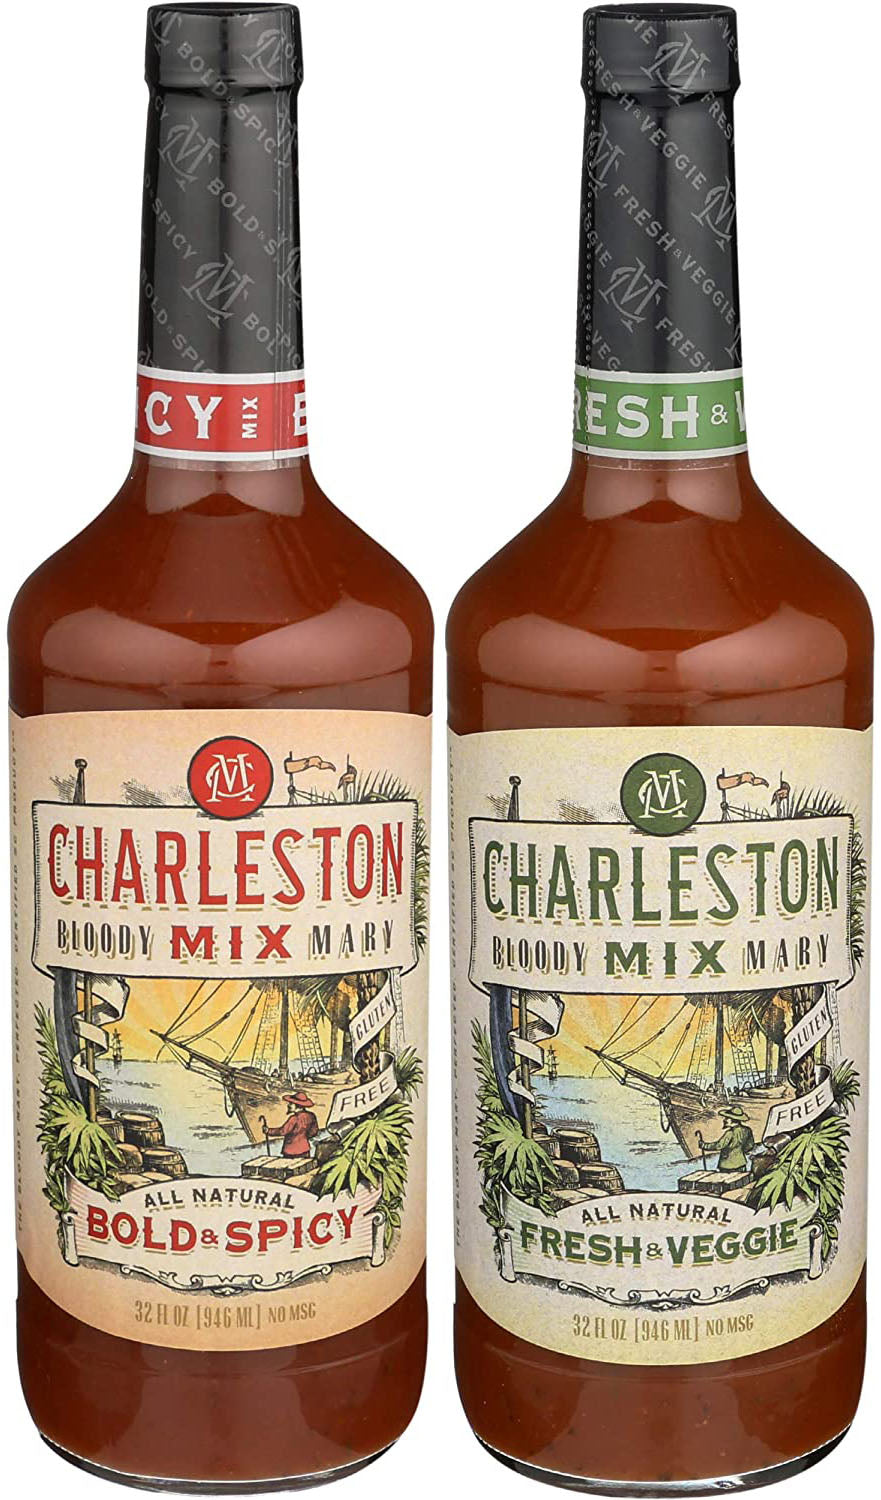 Charleston Mix Bloody Mary Cocktail Mix, 2-Pack, Bold & Spicy, Fresh & Veggie, 32 Fl Oz, 1 of Each, 2-Pack